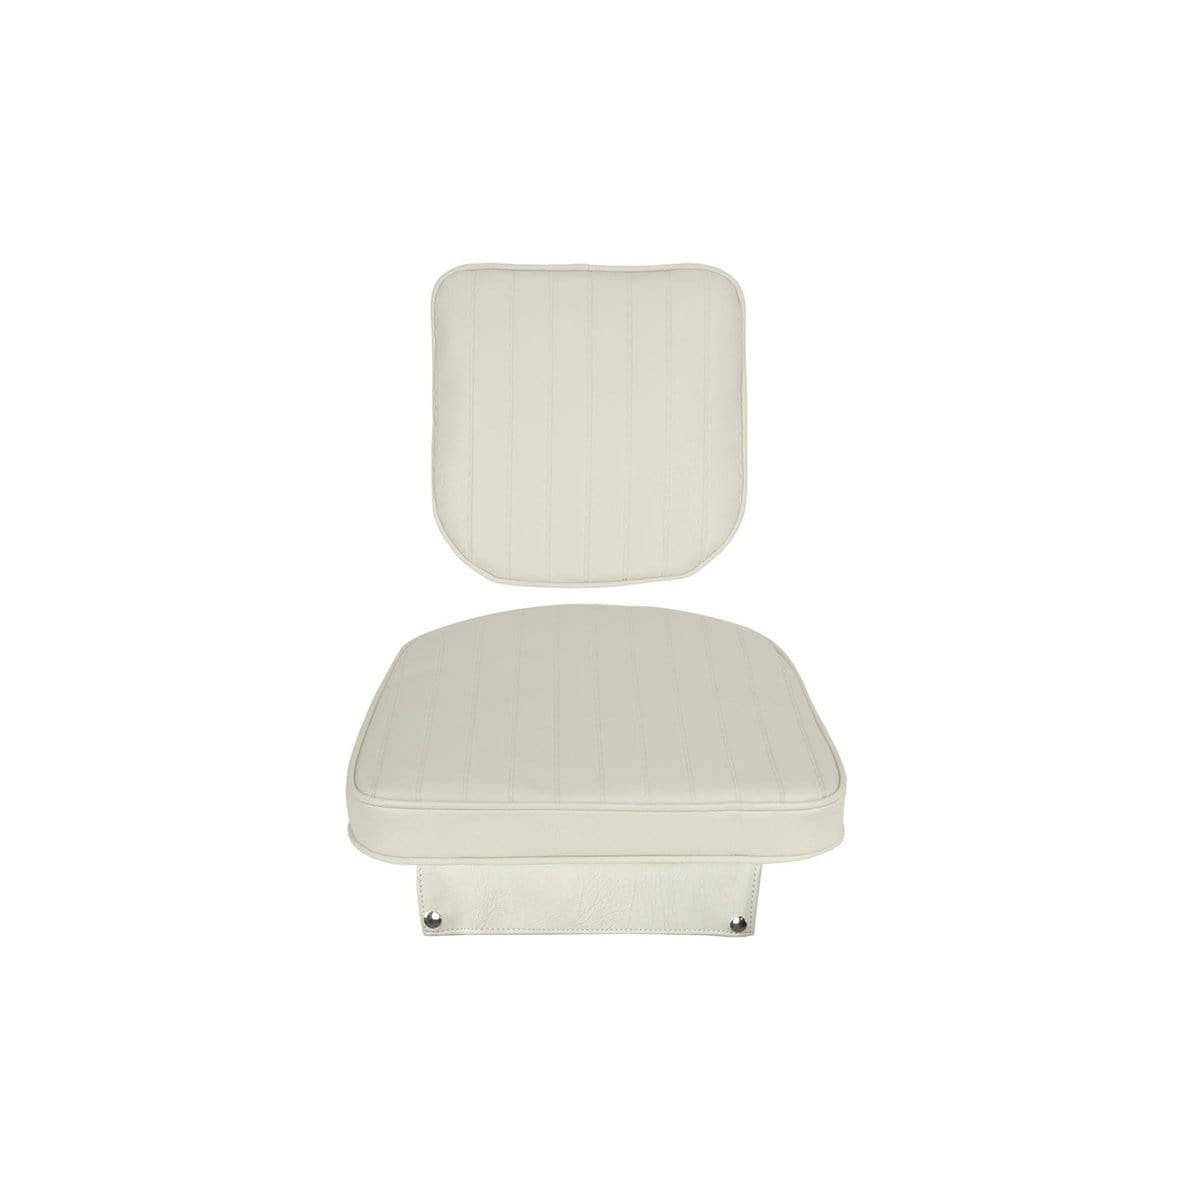 Springfield Qualifies for Free Shipping Springfield Marine Seat Cushion Admiral White #1045036